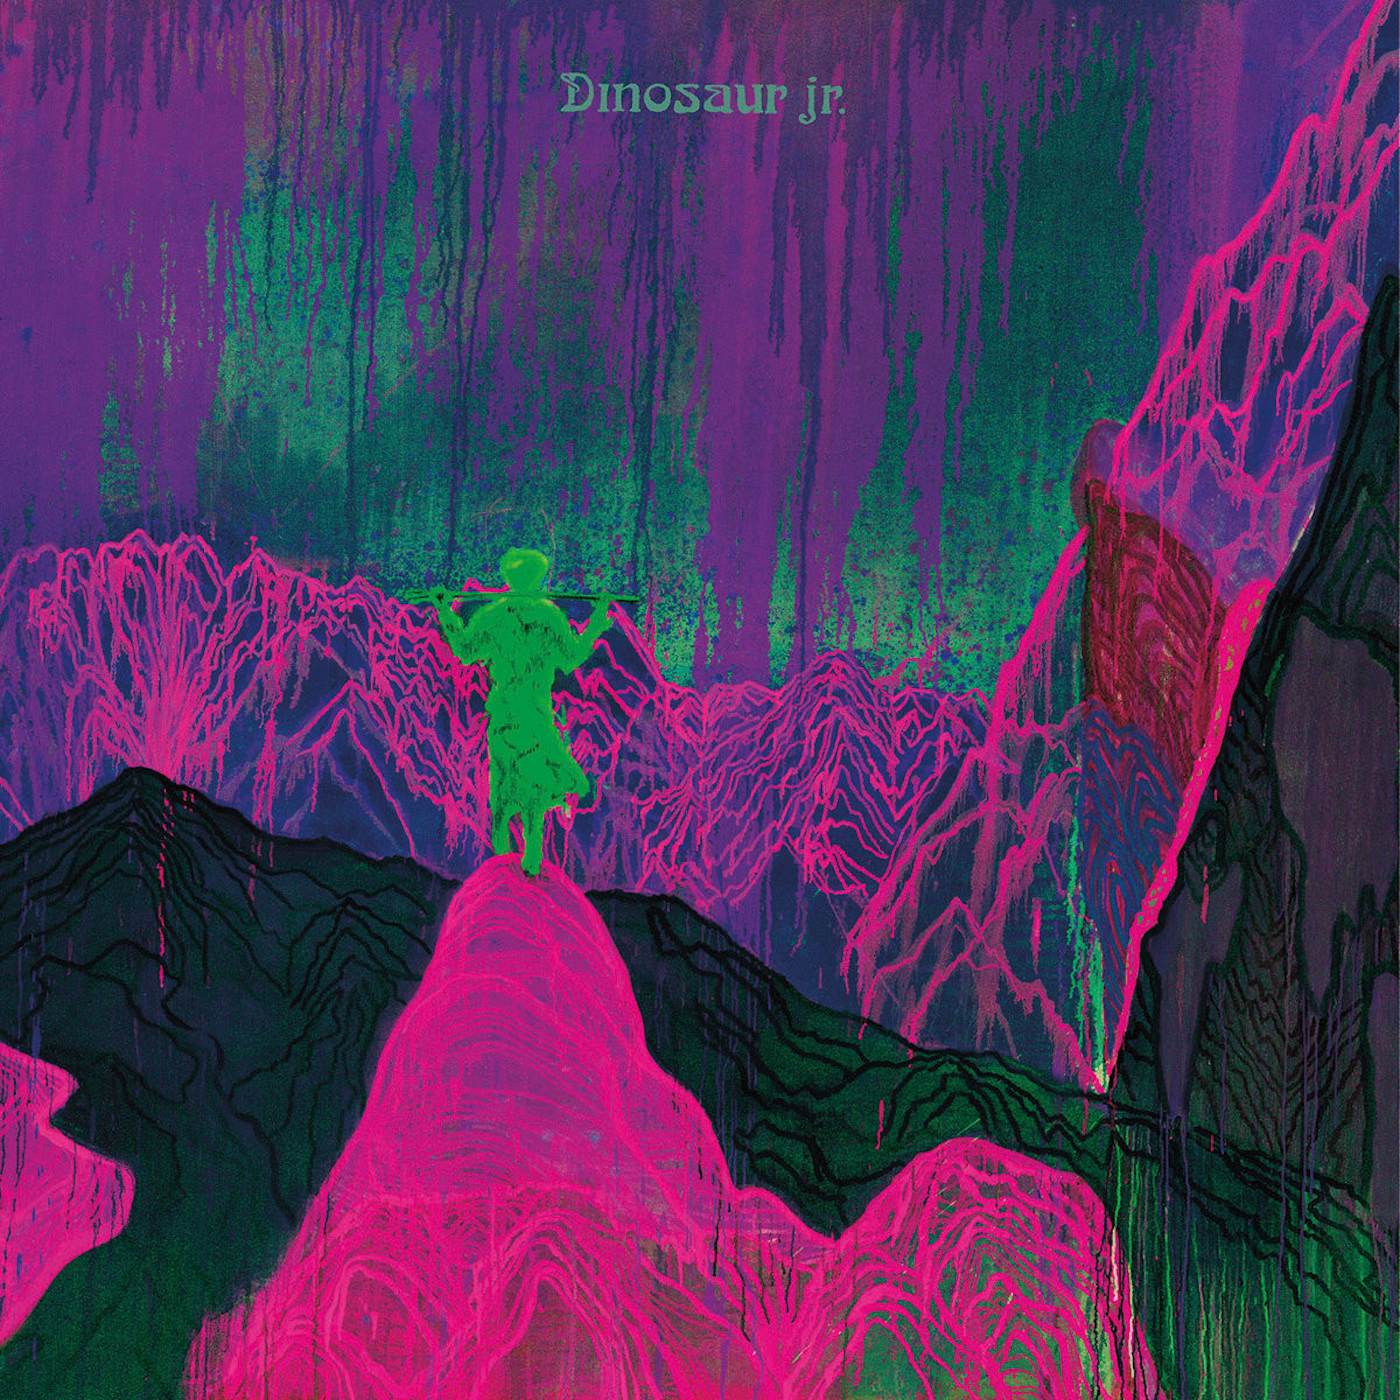 Dinosaur Jr. Give a Glimpse of What Yer Not Vinyl Record